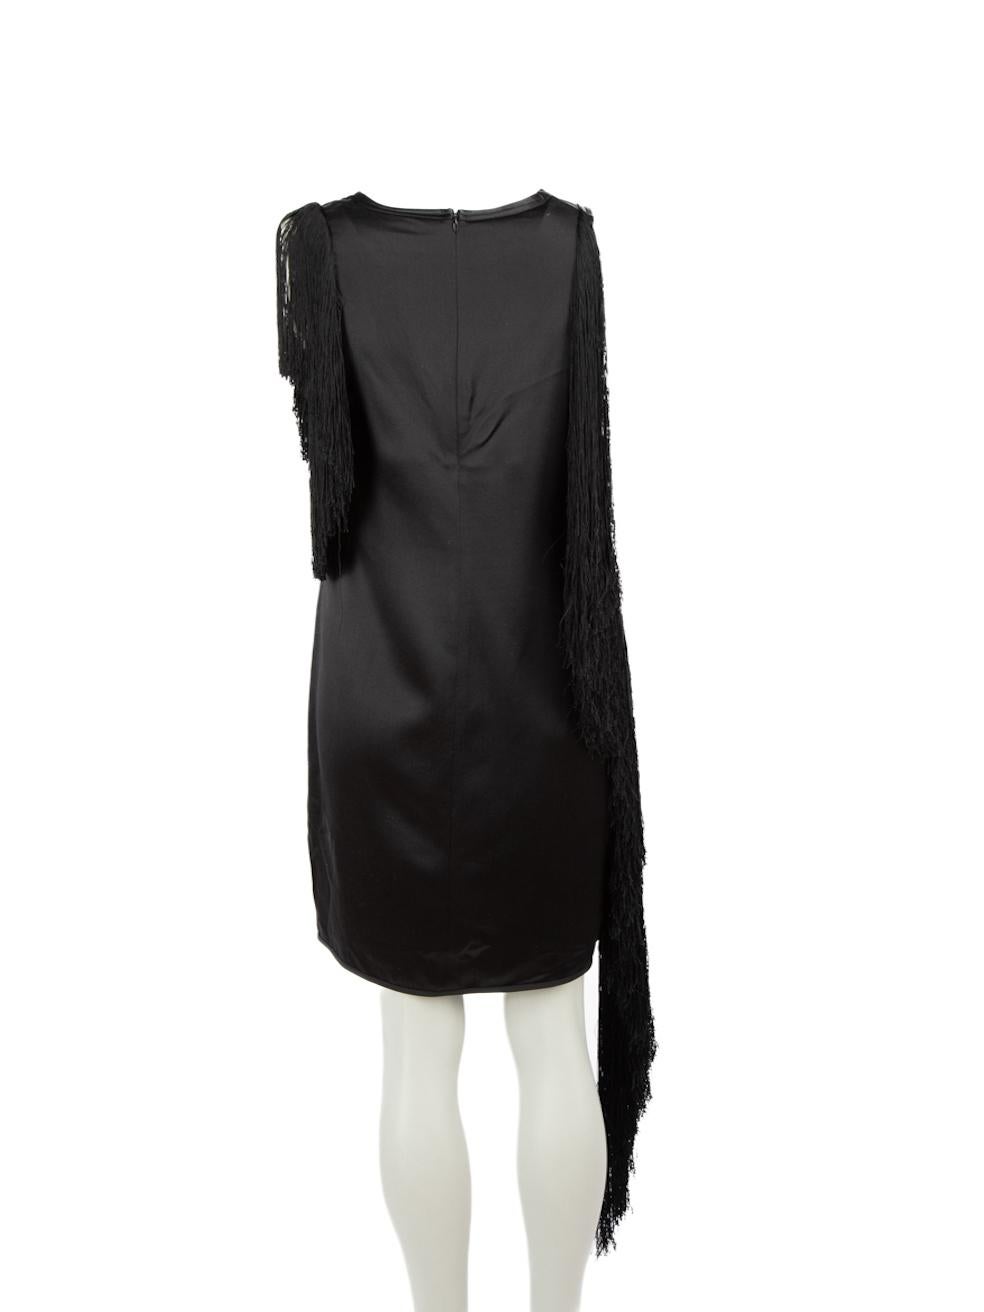 Helmut Lang Black Silk Fringe Mini Dress Size S In New Condition For Sale In London, GB